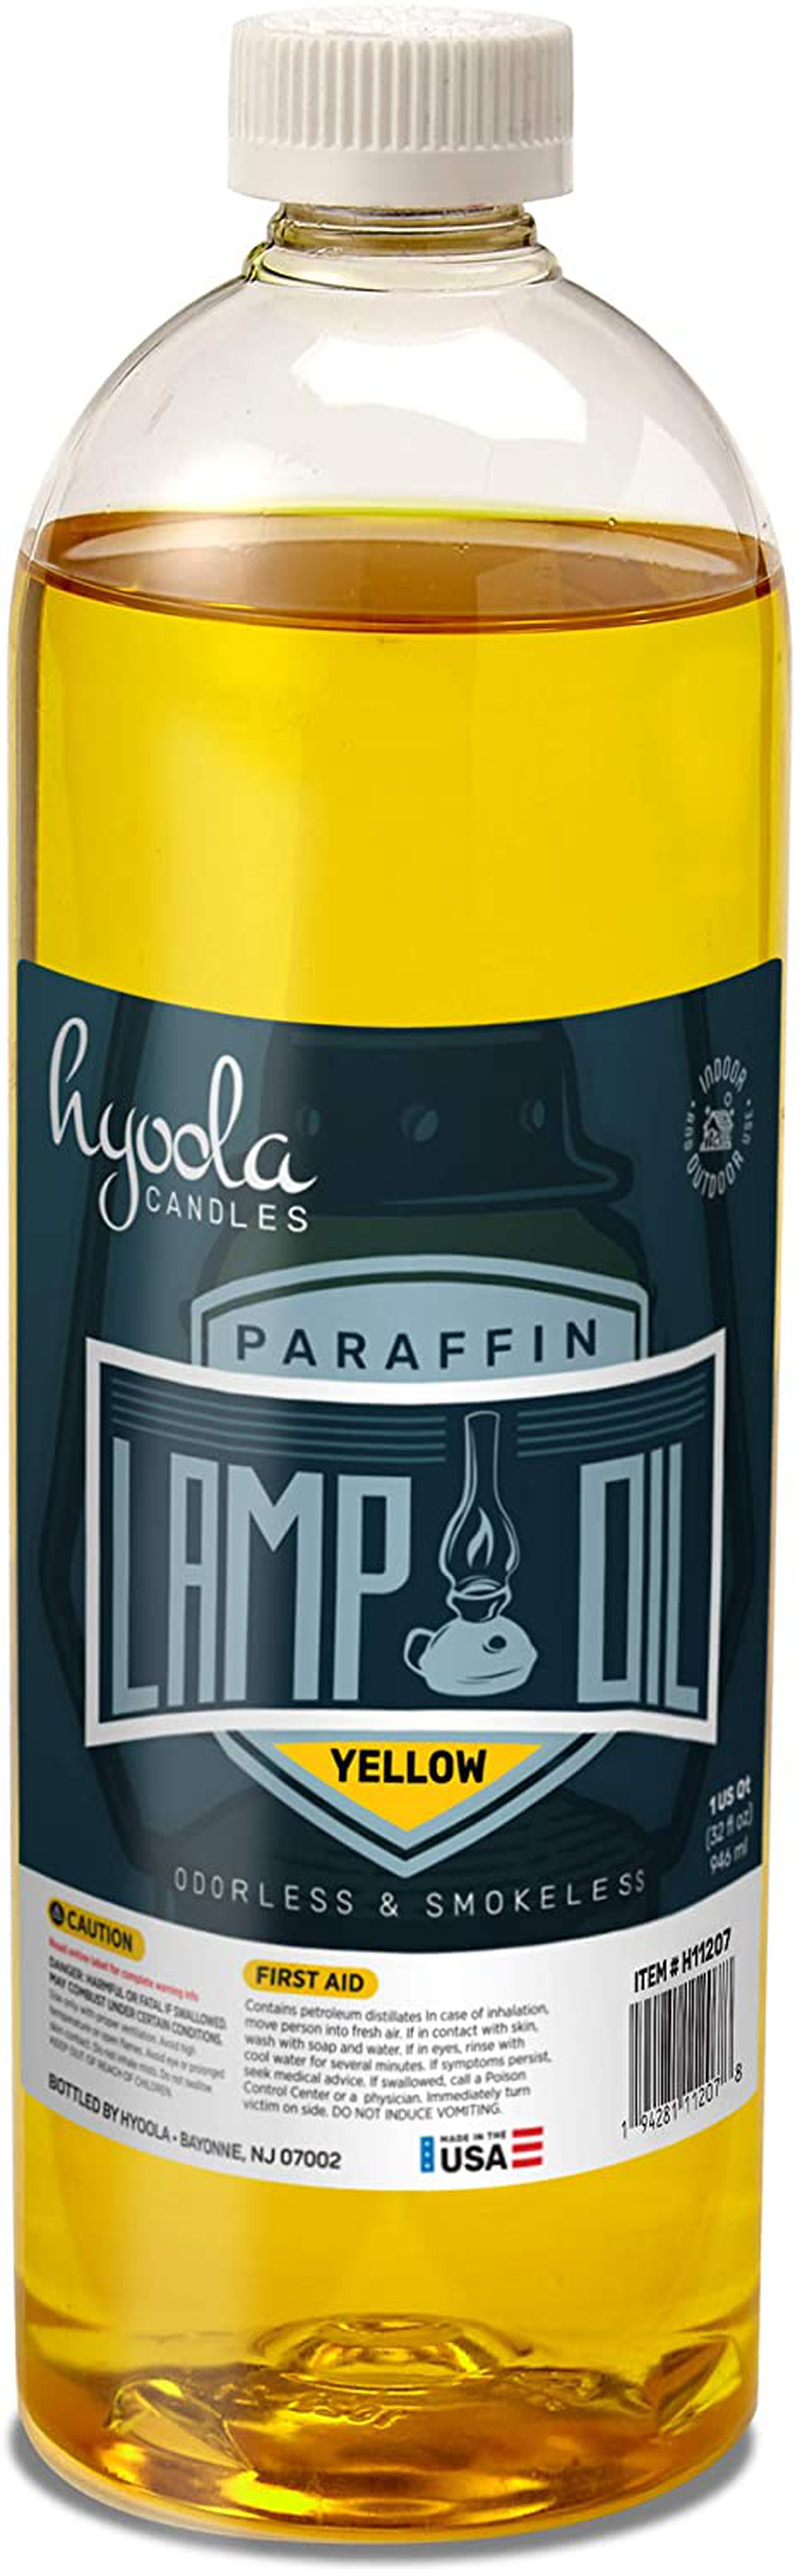 Liquid Paraffin Lamp Oil - Yellow Smokeless, Odorless, Ultra Clean Burning Fuel for Indoor and Outdoor Use - Highest Purity Available - 32oz - by Hyoola Candles